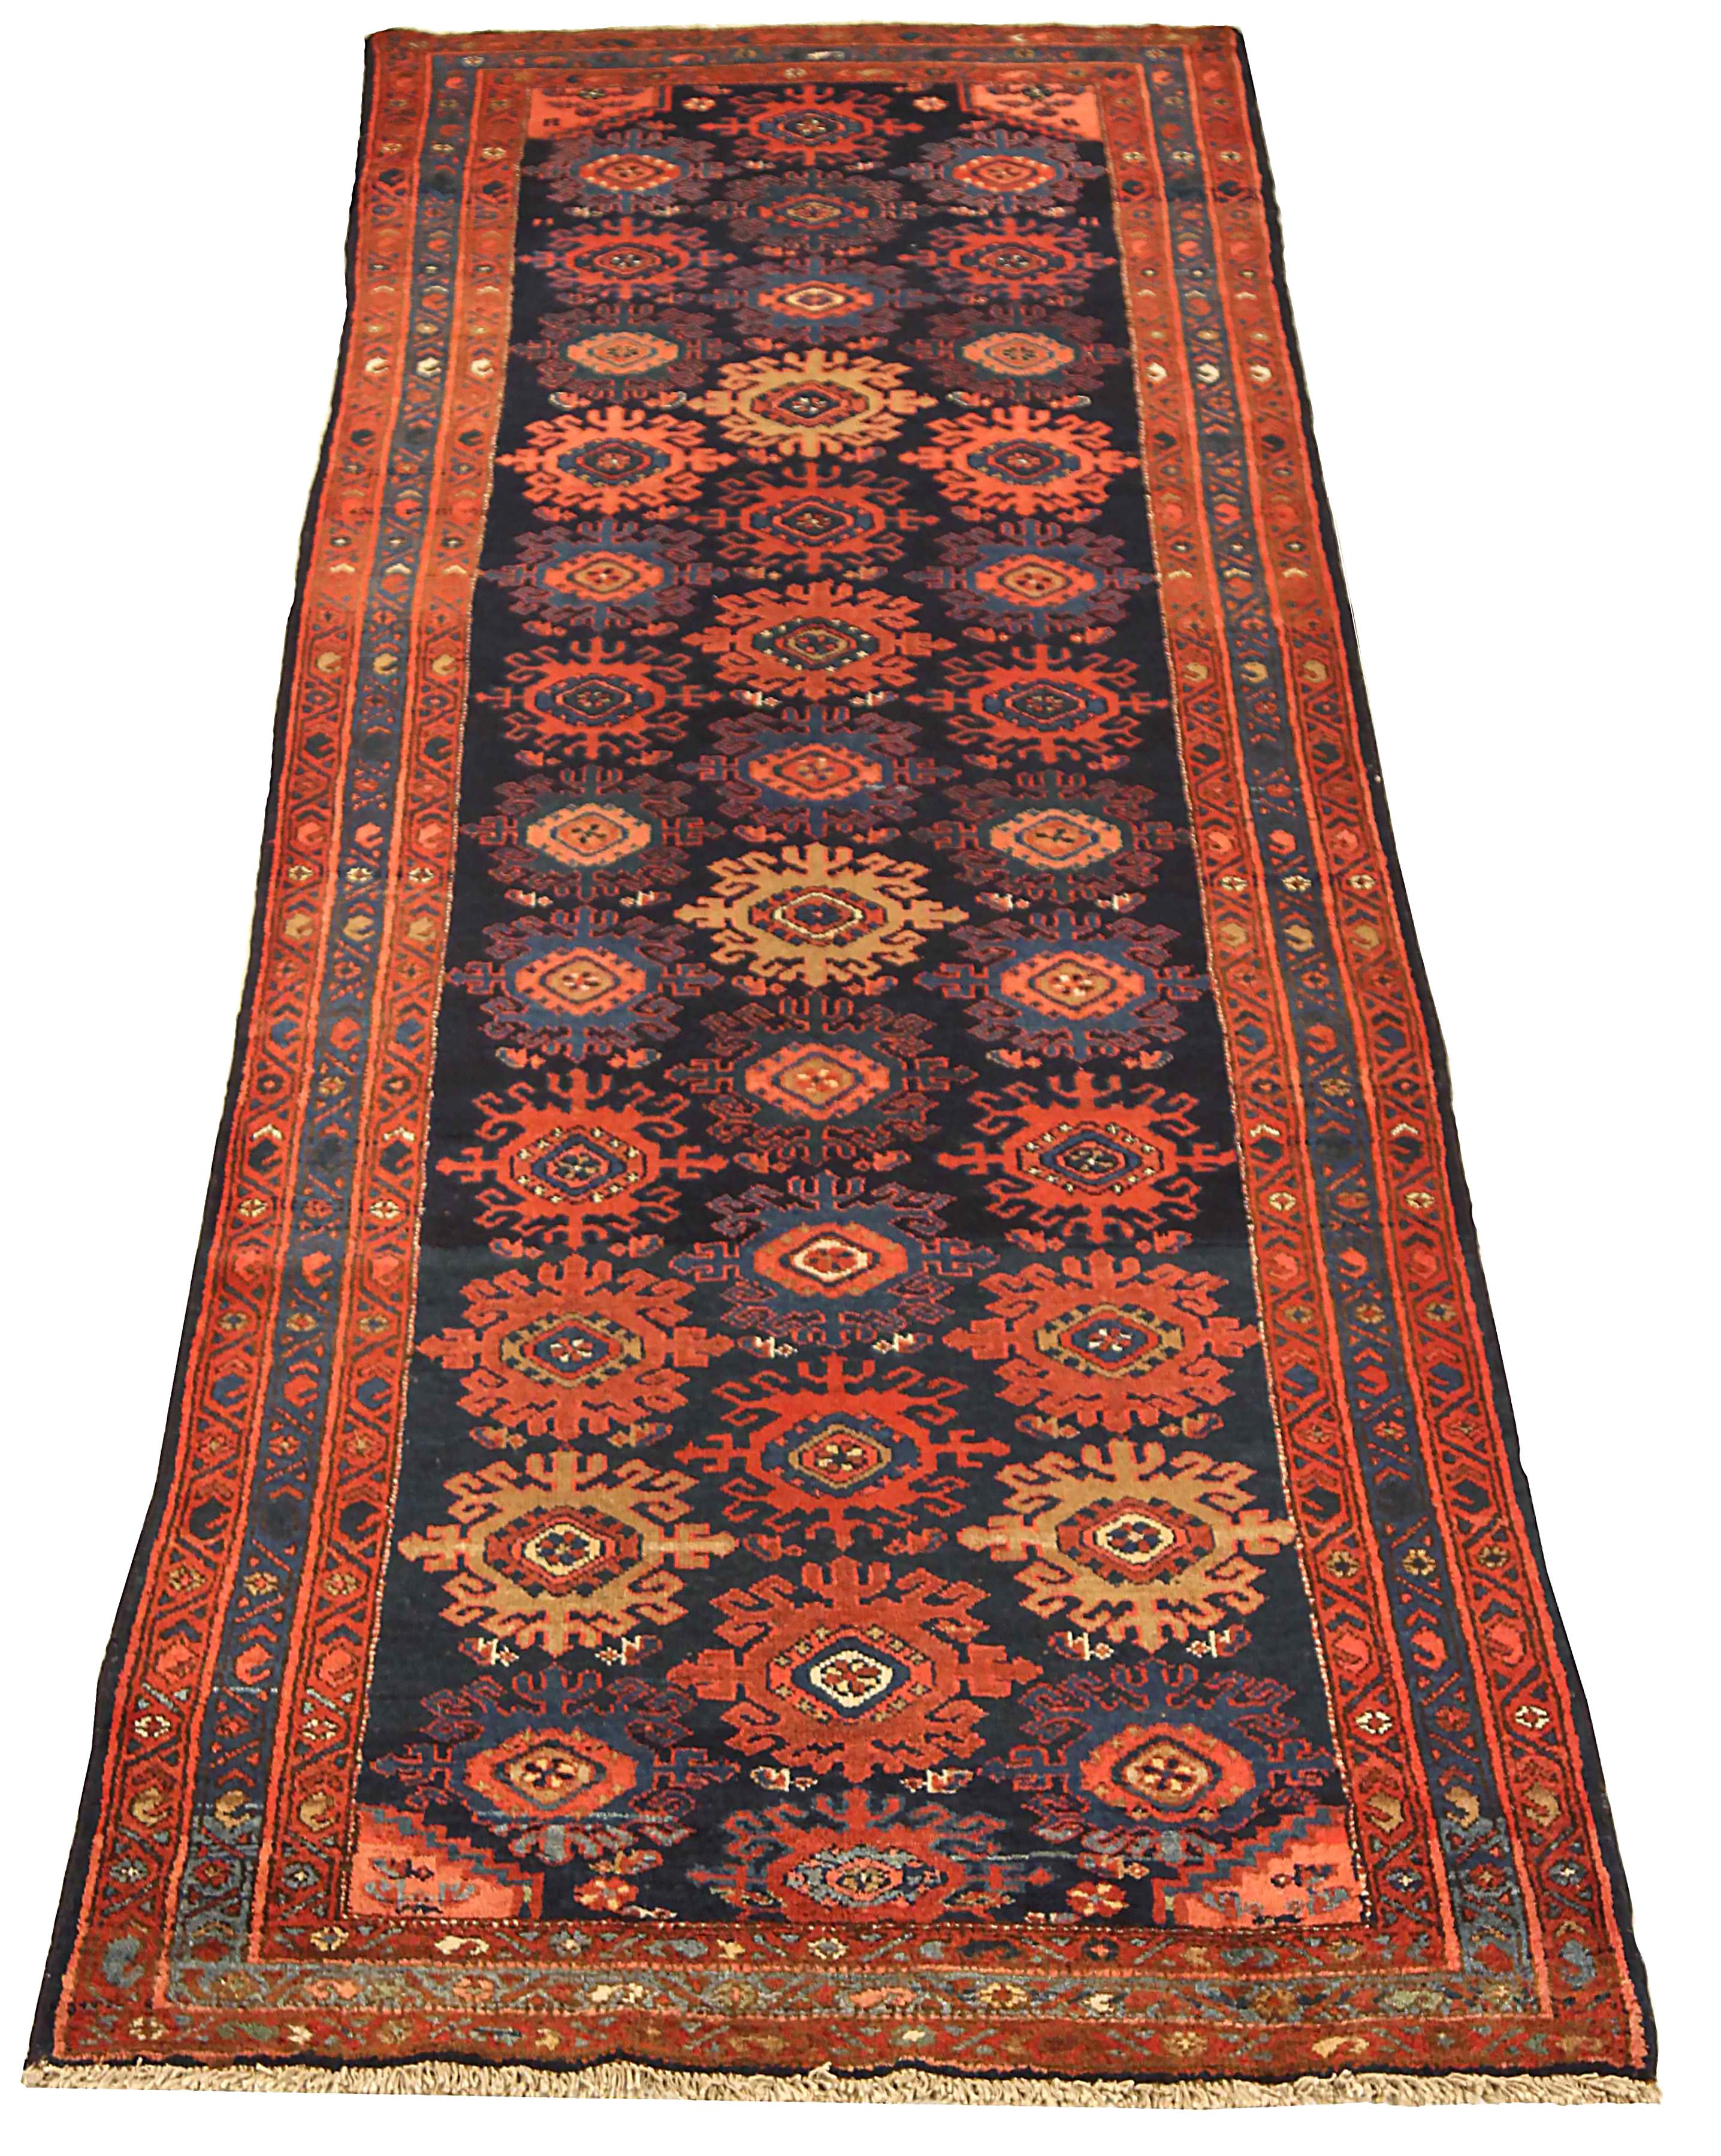 Antique Persian runner rug handwoven from the finest sheep’s wool. It’s colored with all-natural vegetable dyes that are safe for humans and pets. It’s a traditional Malayer design handwoven by expert artisans. It’s a lovely runner rug that can be